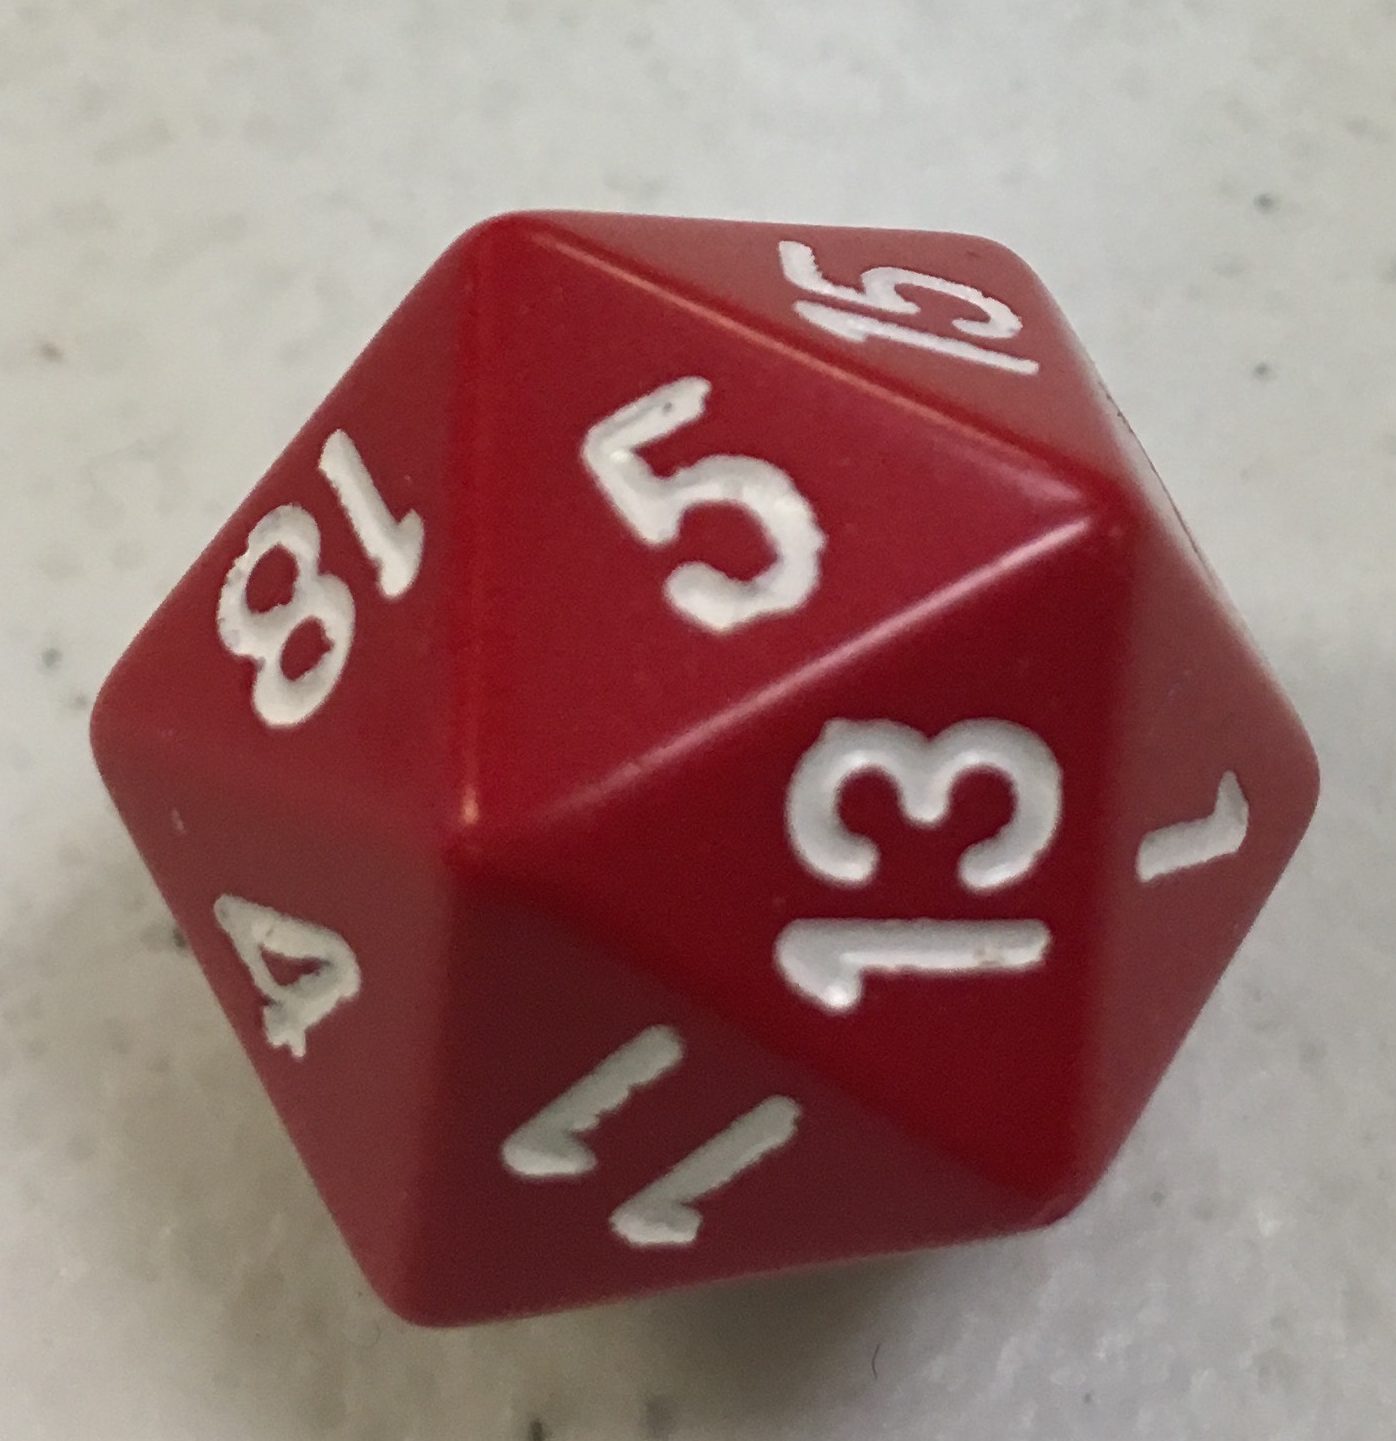 Read more about the article OBJECT HISTORY: A Twenty-sided Die